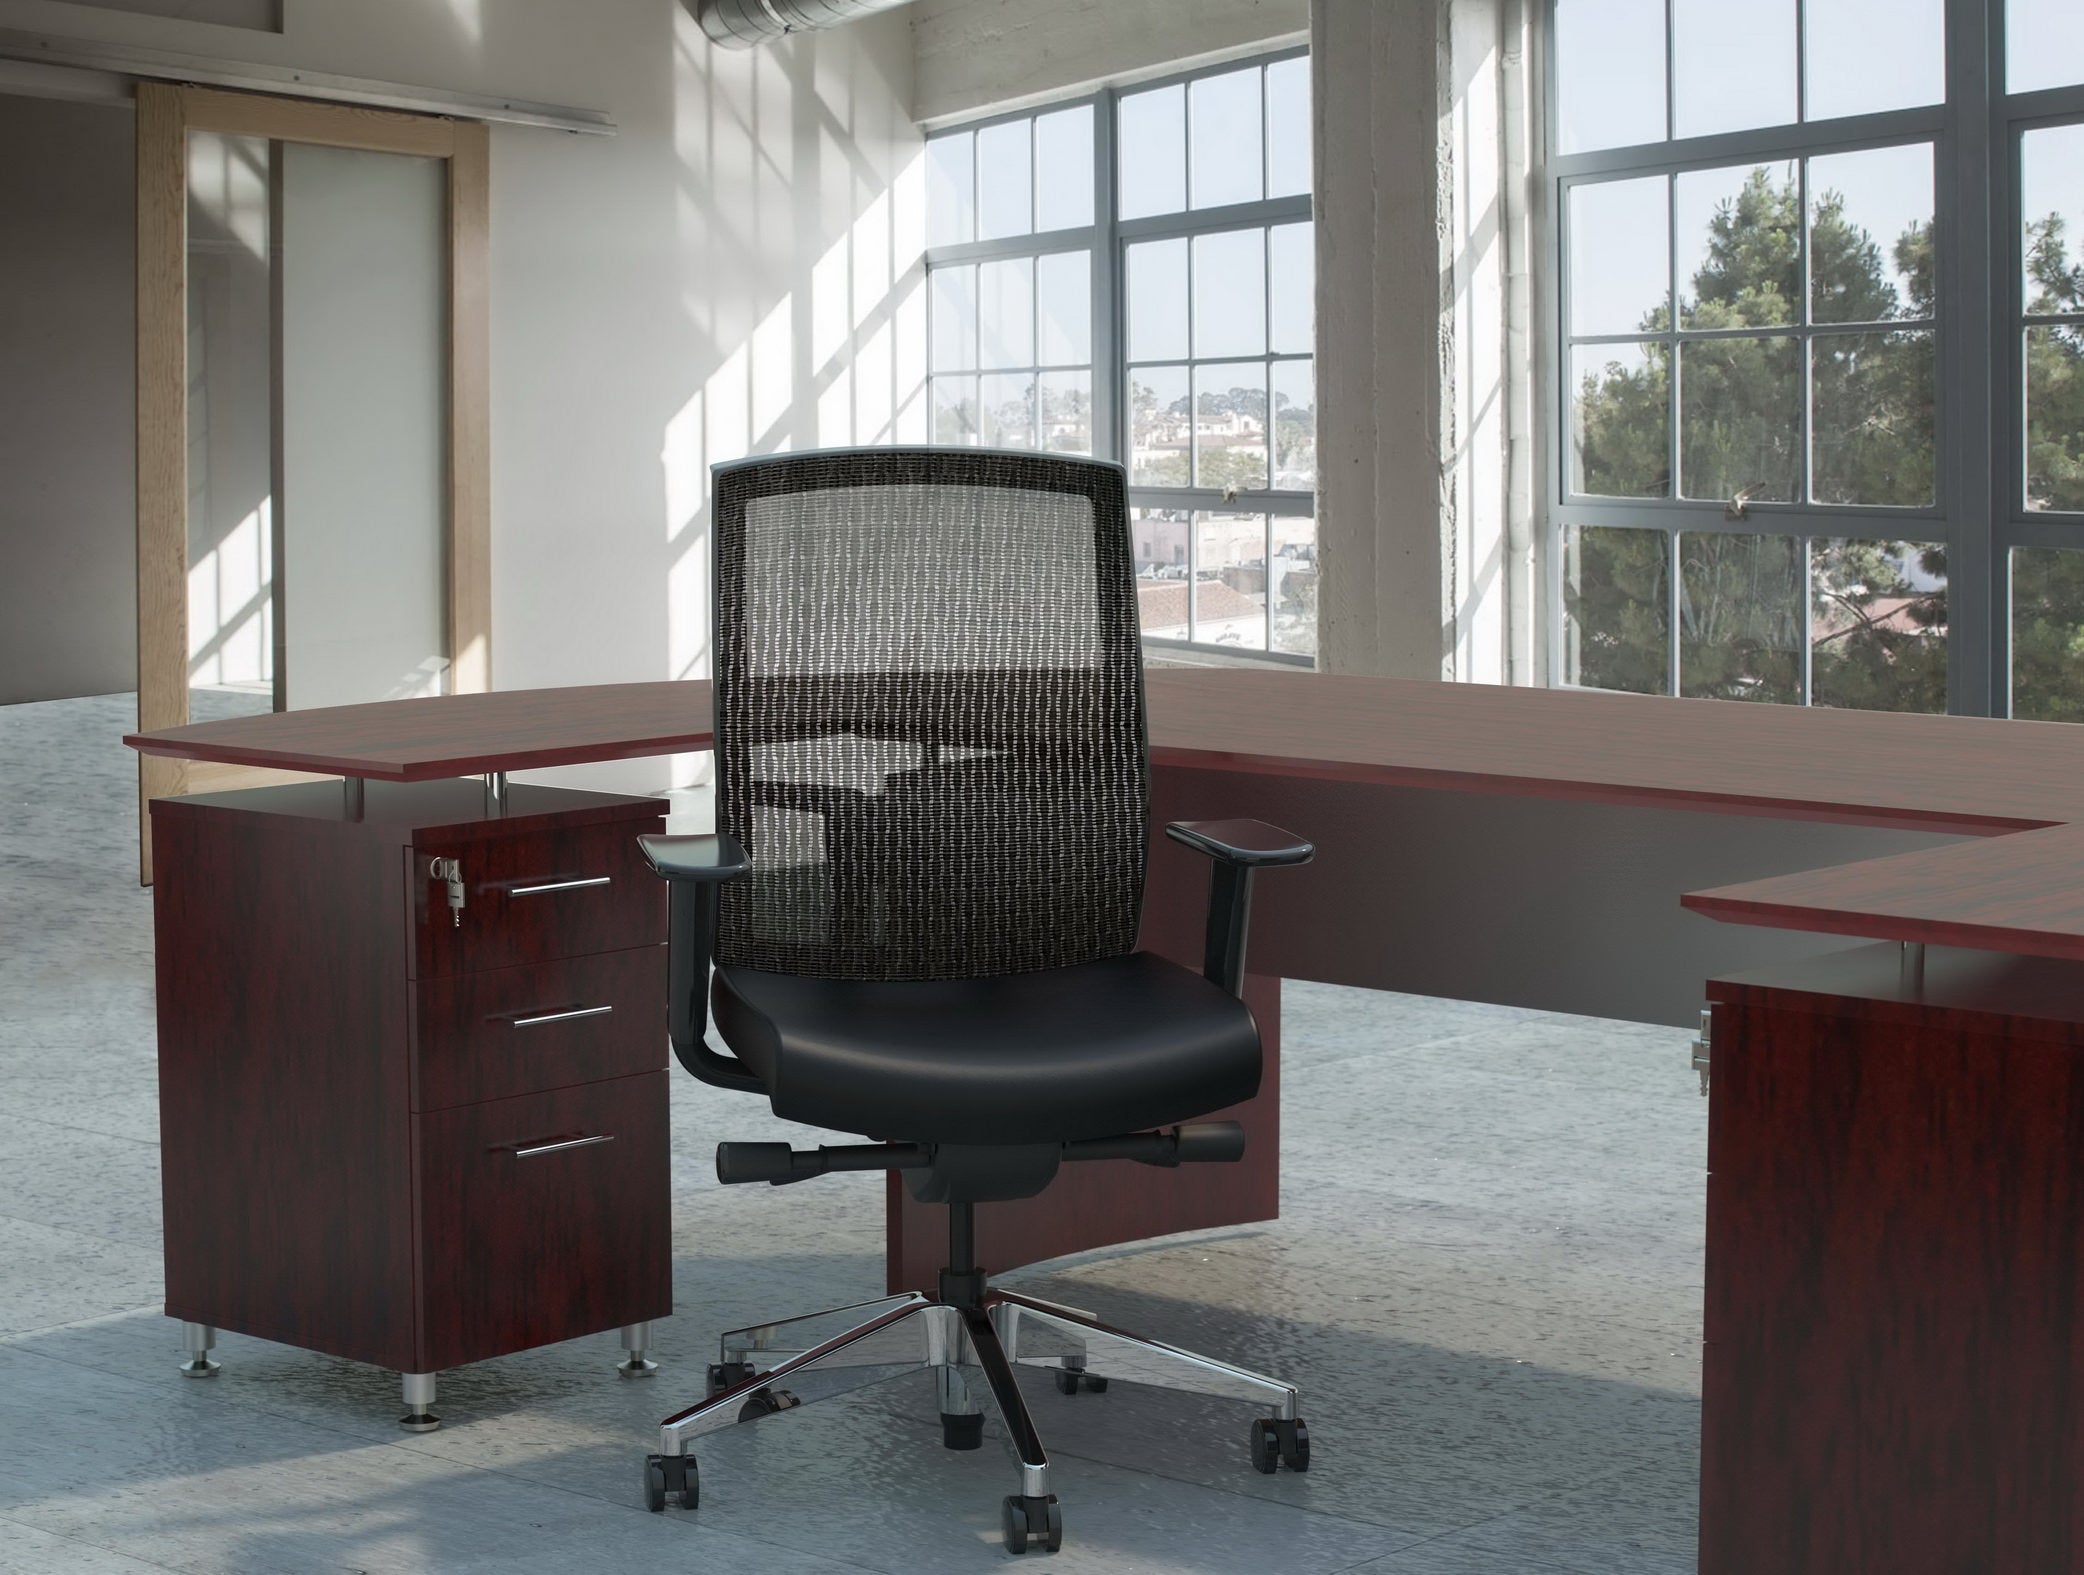 Leather vs Mesh Office Chairs: What’s the Difference?